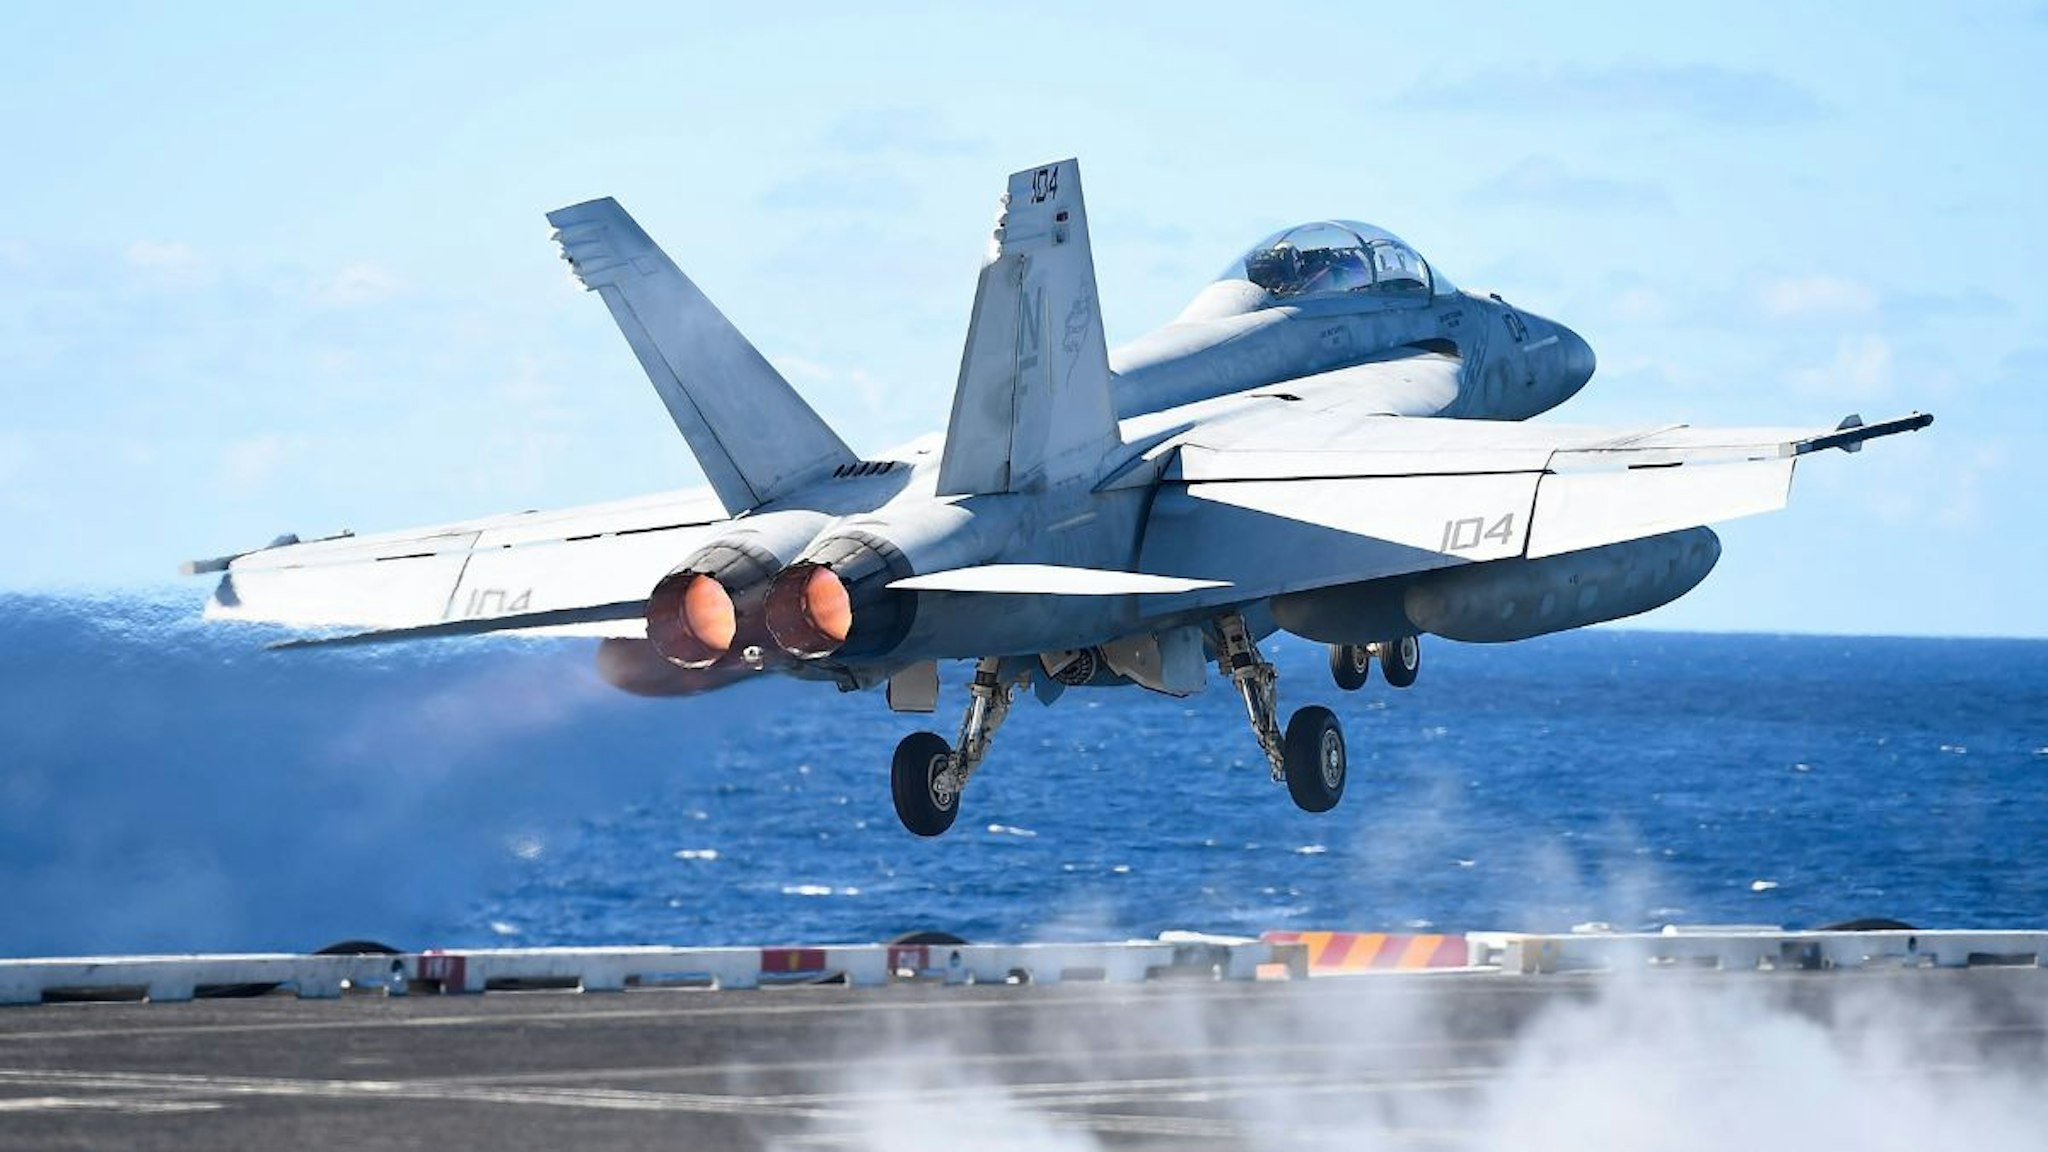 A US Navy Super Hornet takes off from the deck of the USS Ronald Reagan on July 14, 2017 in Townsville, Australia.